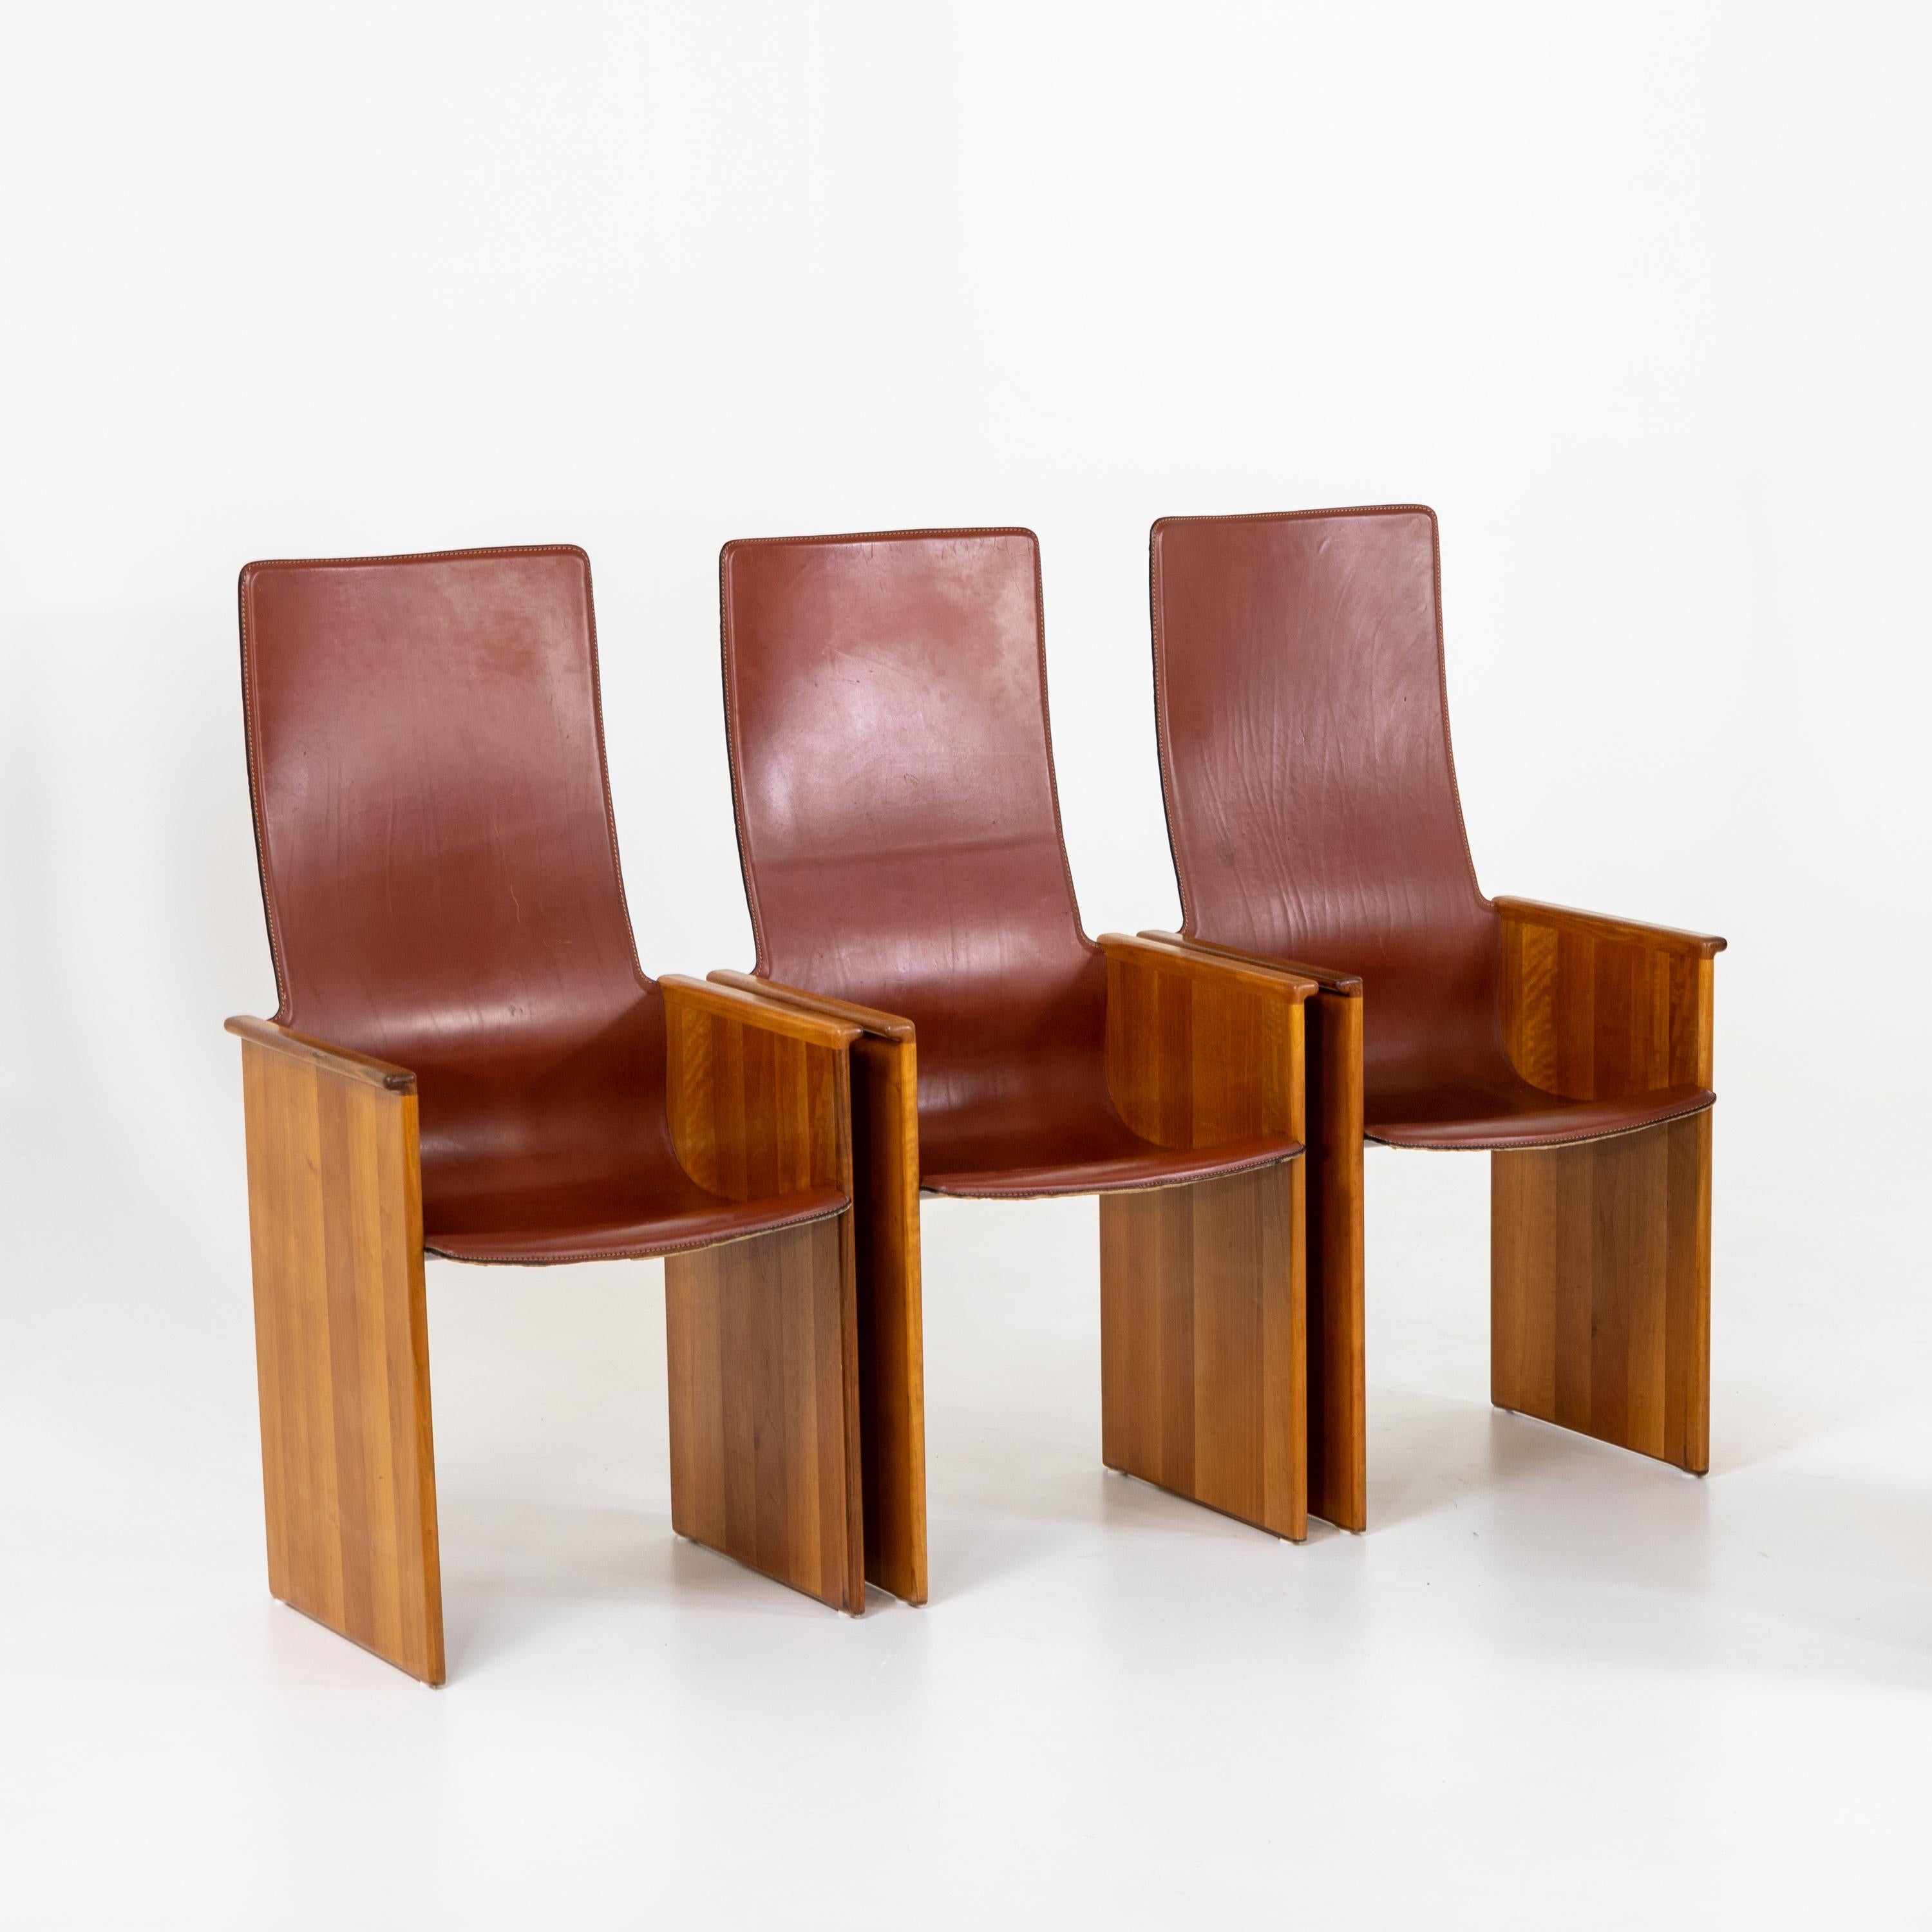 Late 20th Century Arm Chairs by Afra and Tobia Scarpa, 1960s